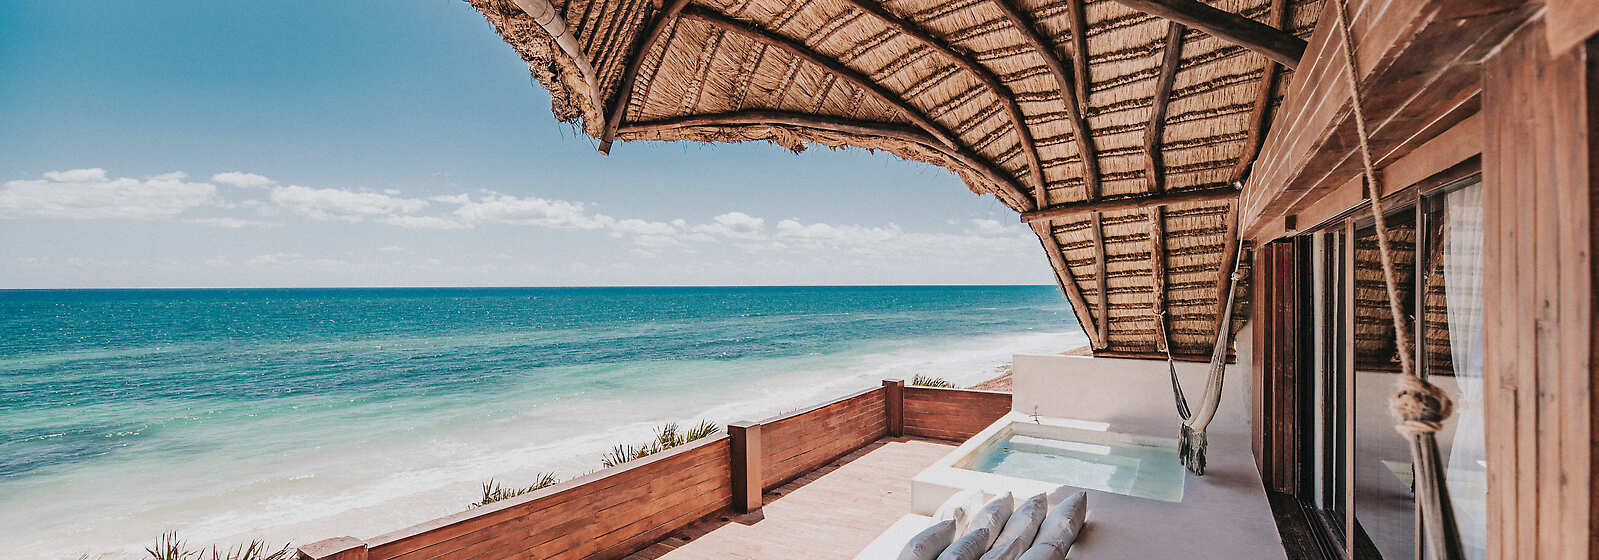 Casa Palapa features a private terrace with an ocean view, a sitting area, a dining room for 20 guests, a jacuzzi, and a beach cabana. 